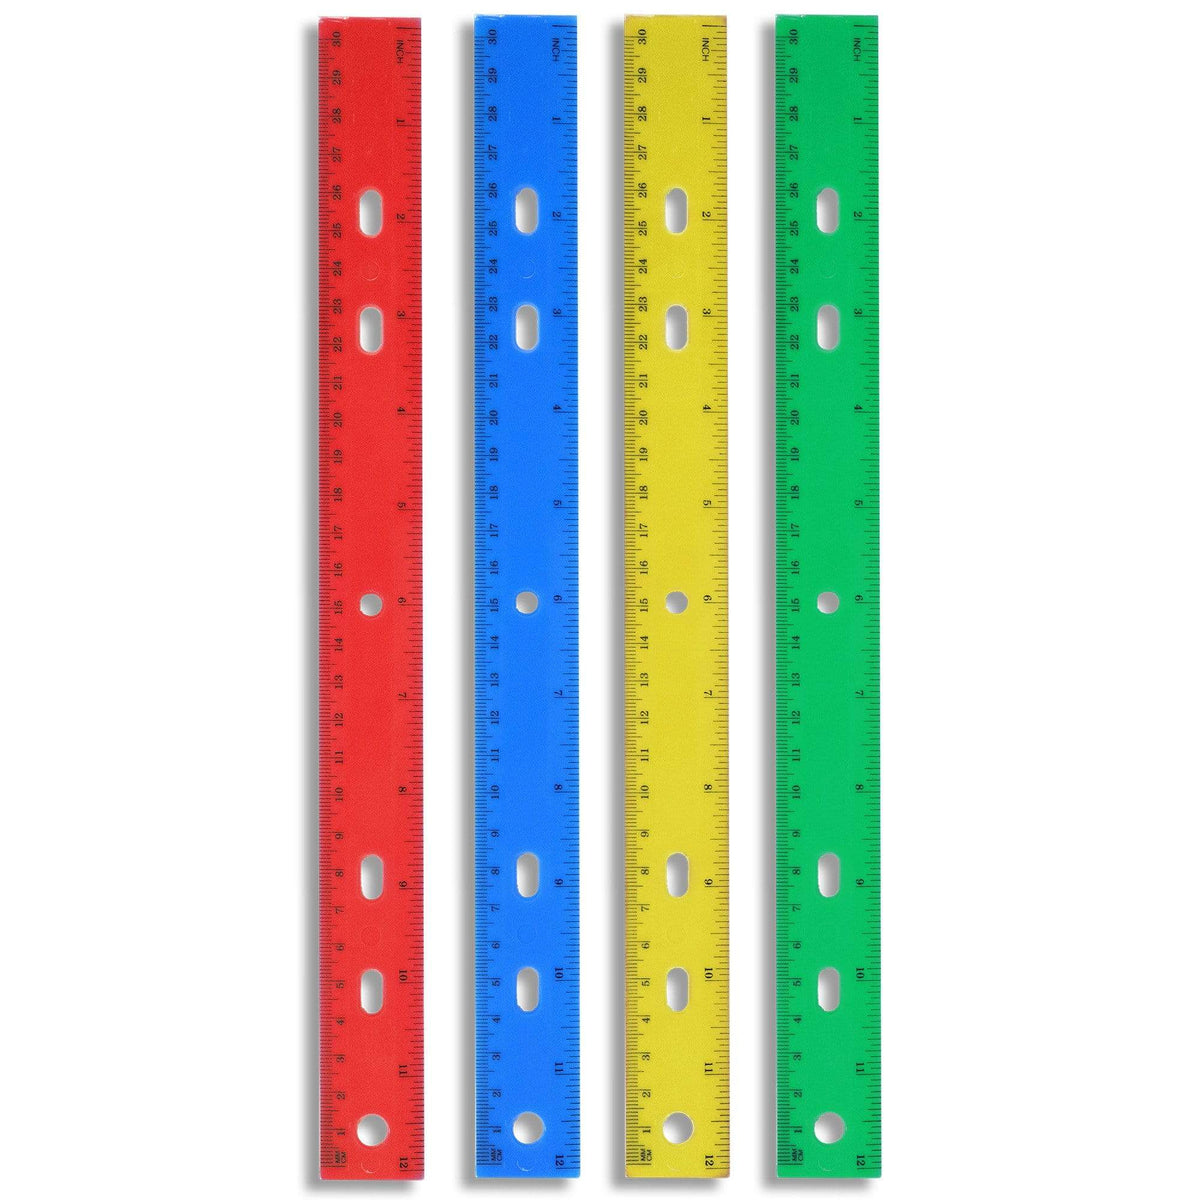  LYDTICK 64 Pack Rulers 12 Inch in Bulk, Plastic Rulers